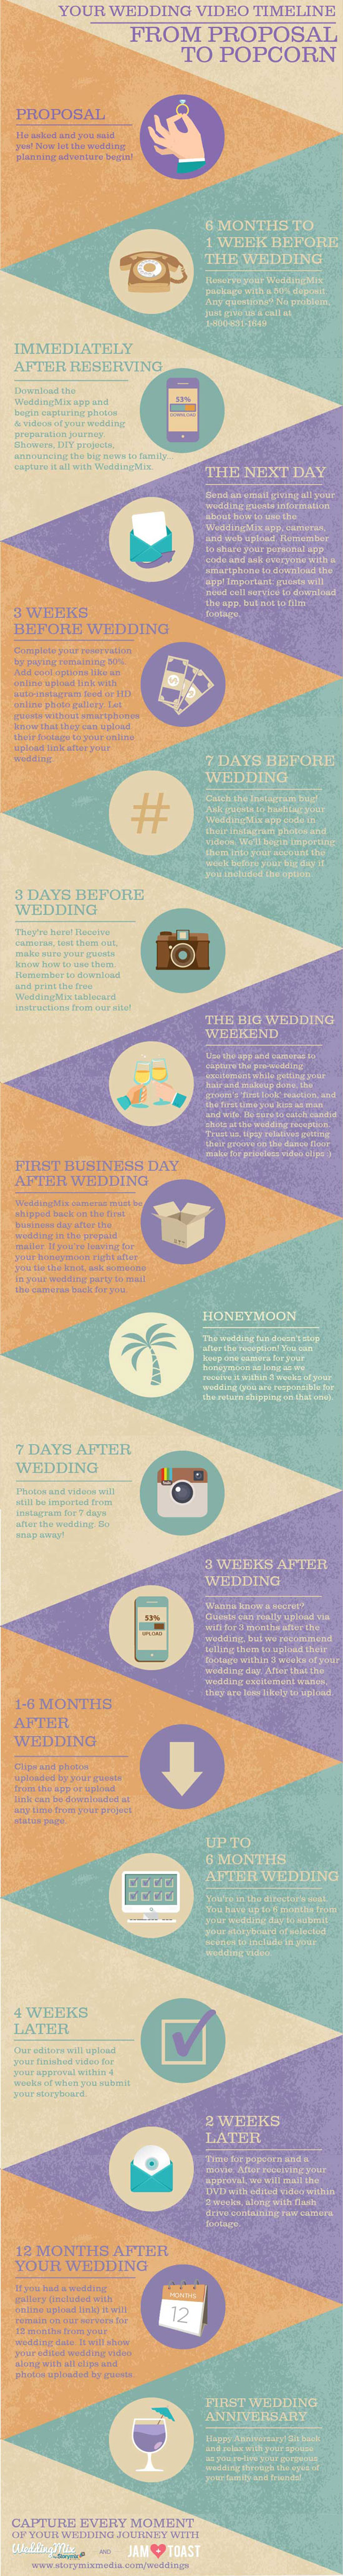 wedding video timeline with rented cameras from WeddingMix